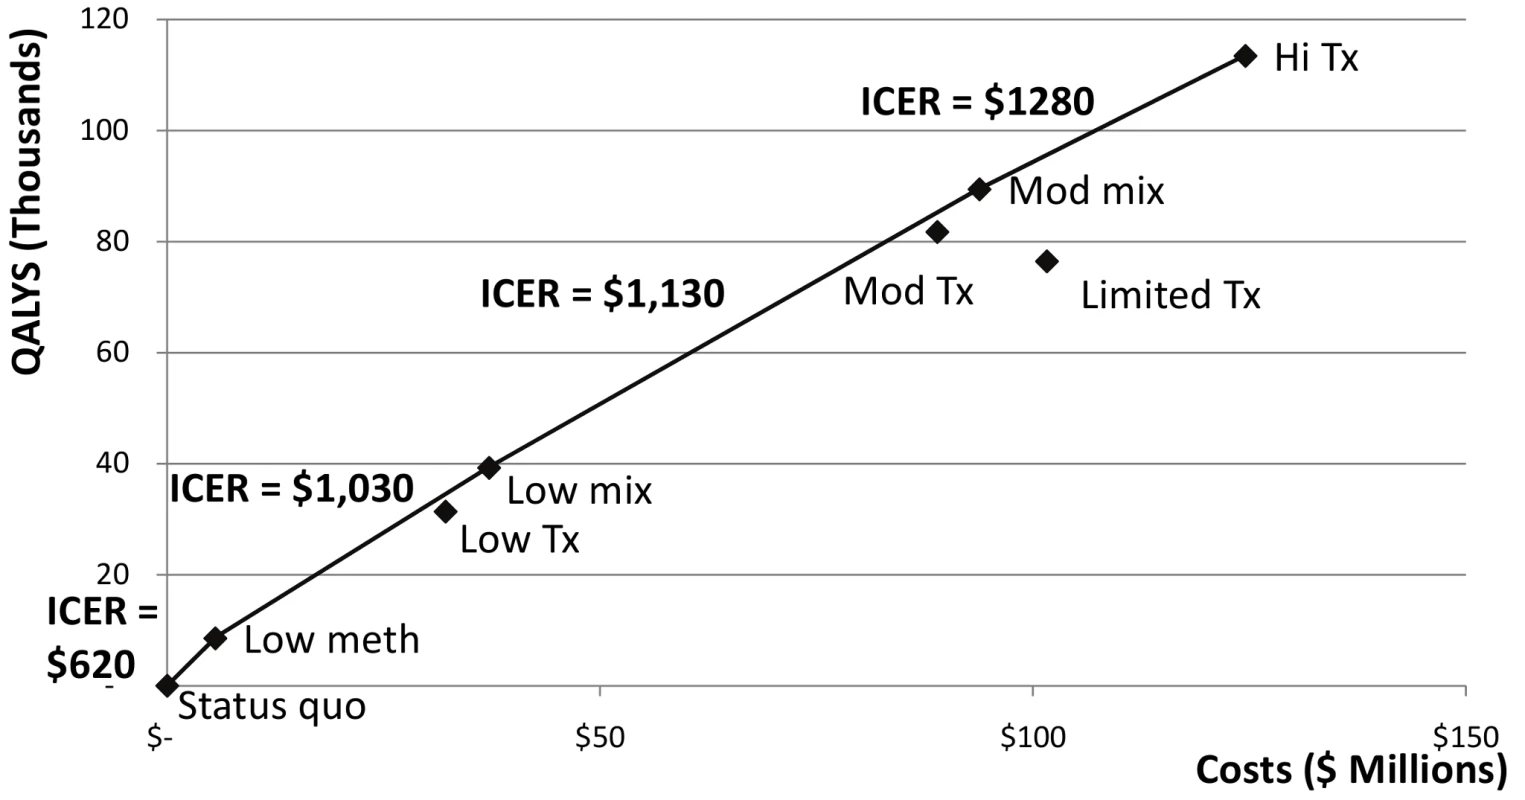 Cost effectiveness of various strategies for scaling up methadone substitution therapy and ART access in Ukraine, assuming that only a low level of methadone substitution therapy (3.1% of IDUs on methadone substitution therapy) is feasible.